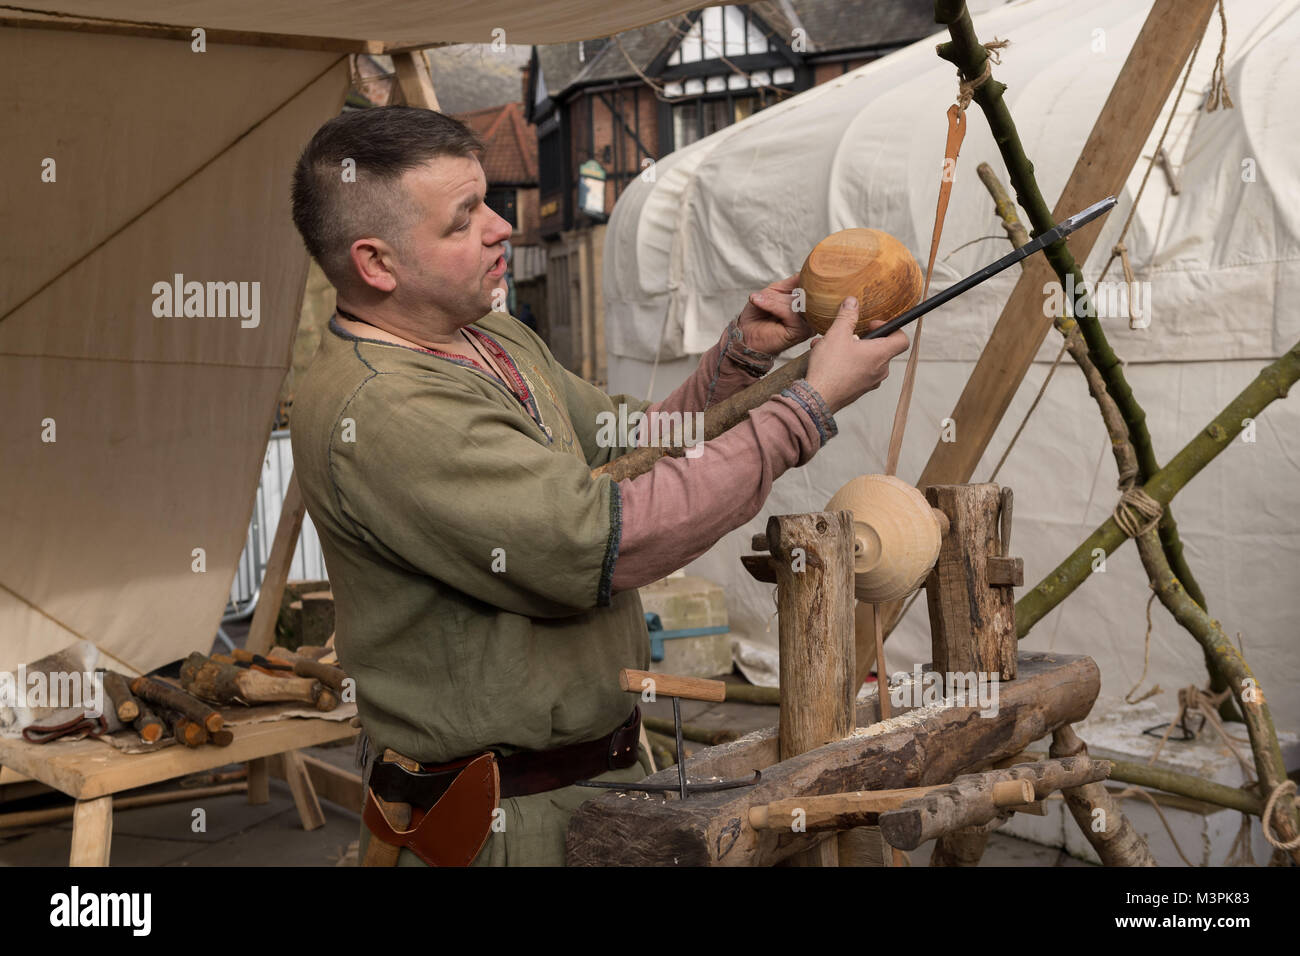 York, UK, 12th February 2018. Person dressed as a Viking at the annual Jorvik Viking Festival held in the city centre of York. This man is a skilled wood-turner & is holding & examining a wooden bowl he has just finished crafting, using a simple lathe & handmade tools. He is taking part in the realistic re-enactment of life at a Viking market. North Yorkshire, England, UK.  Credit: Ian Lamond/Alamy Live News Stock Photo